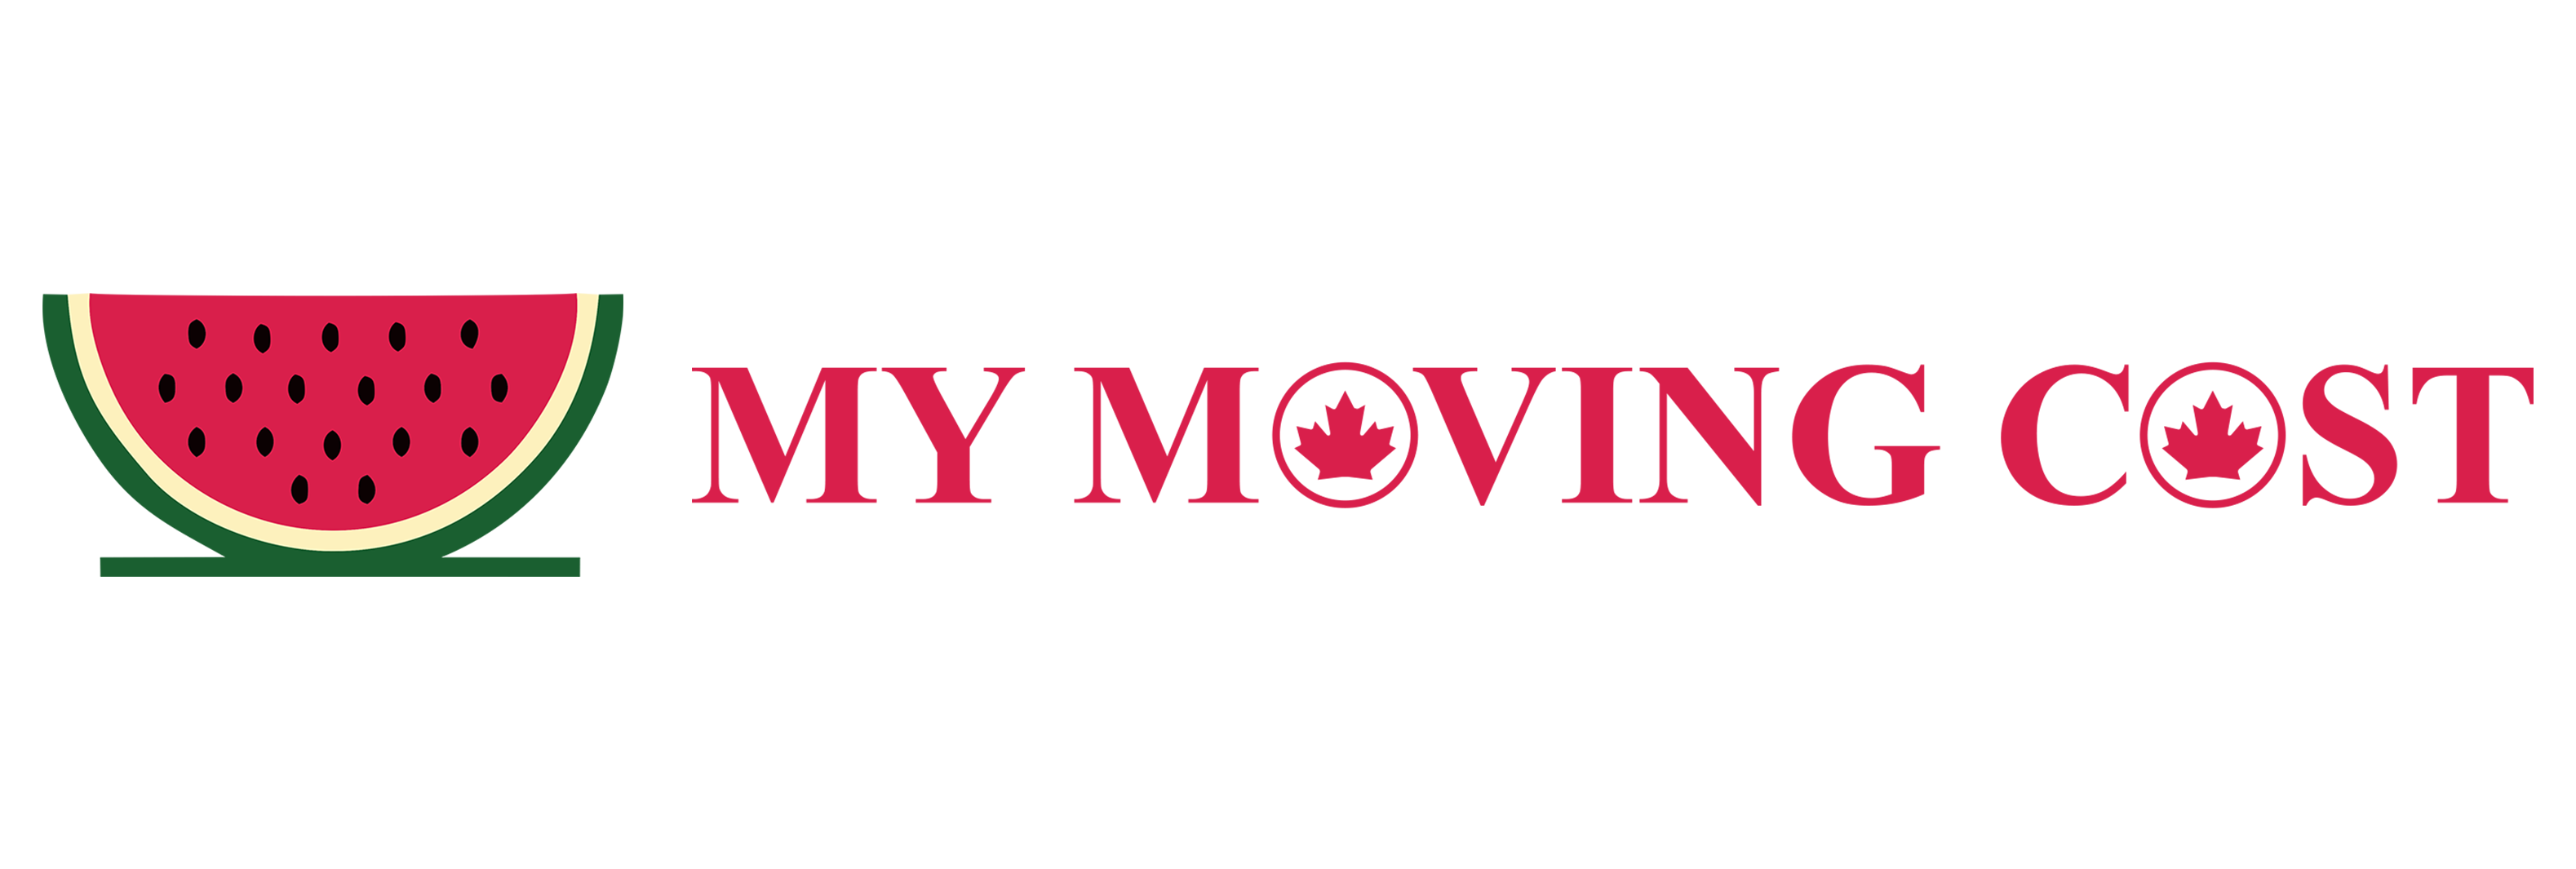 My Moving Cost